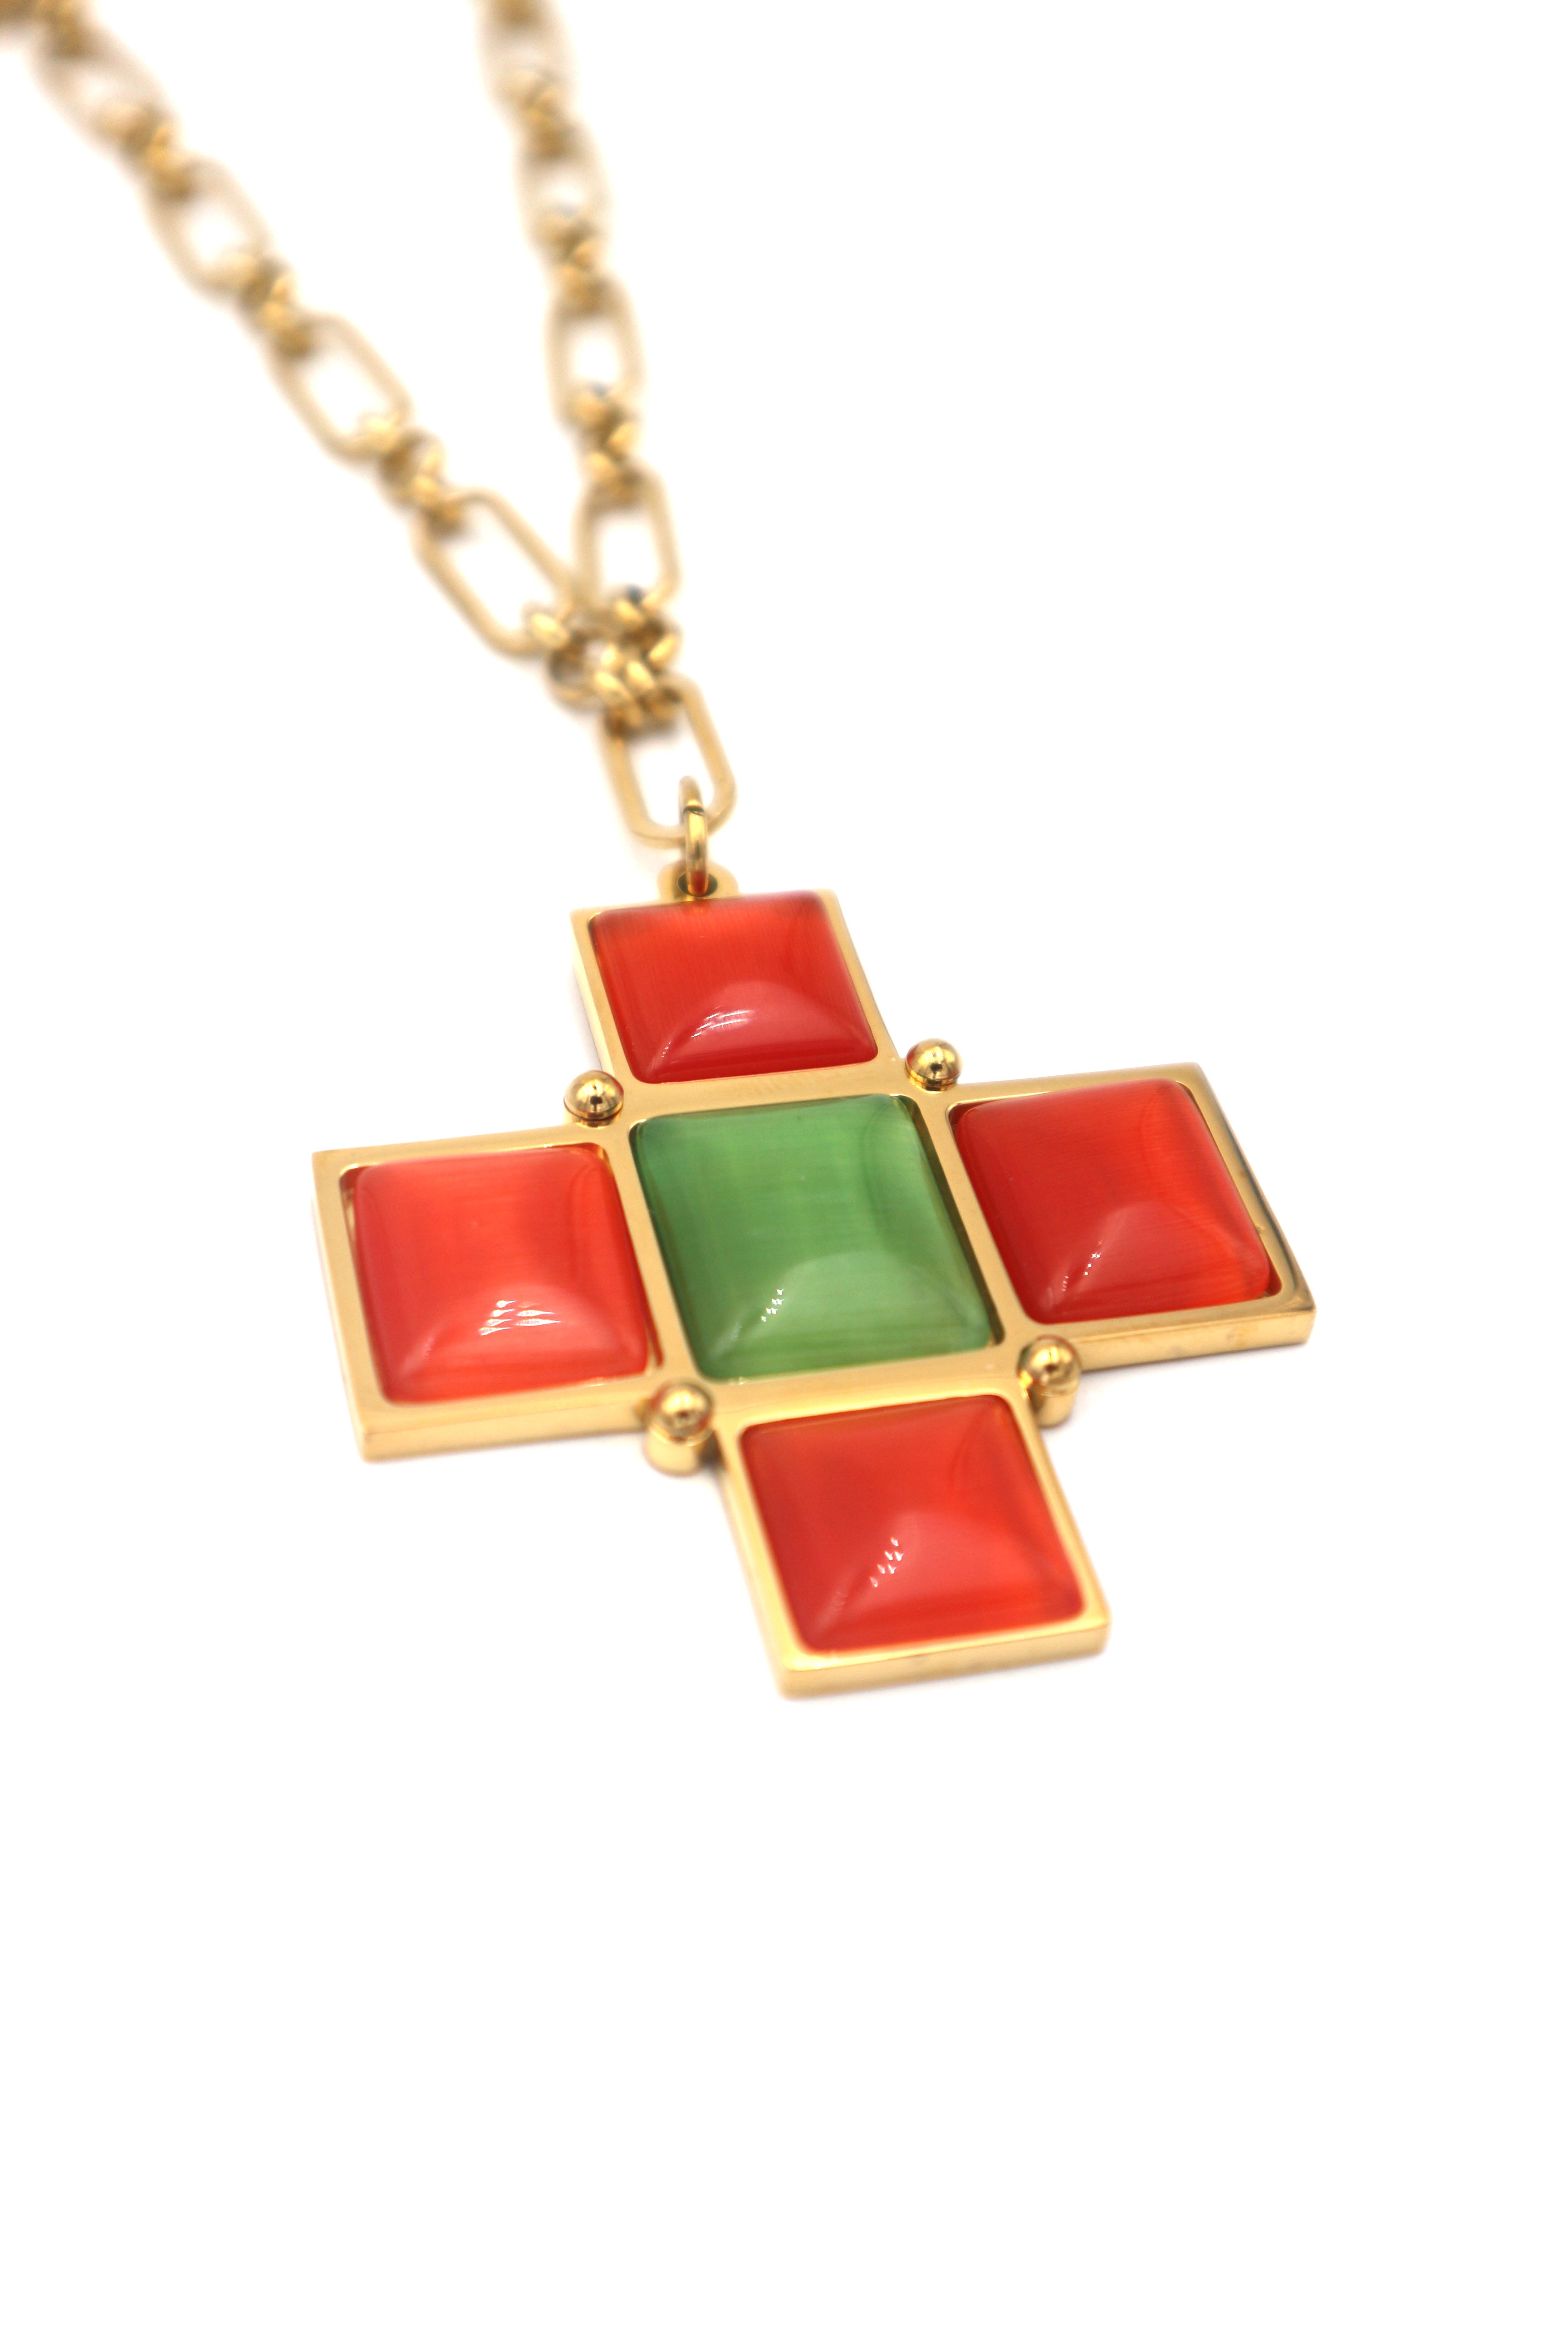 ADRIA RED // The Red and Green Cross